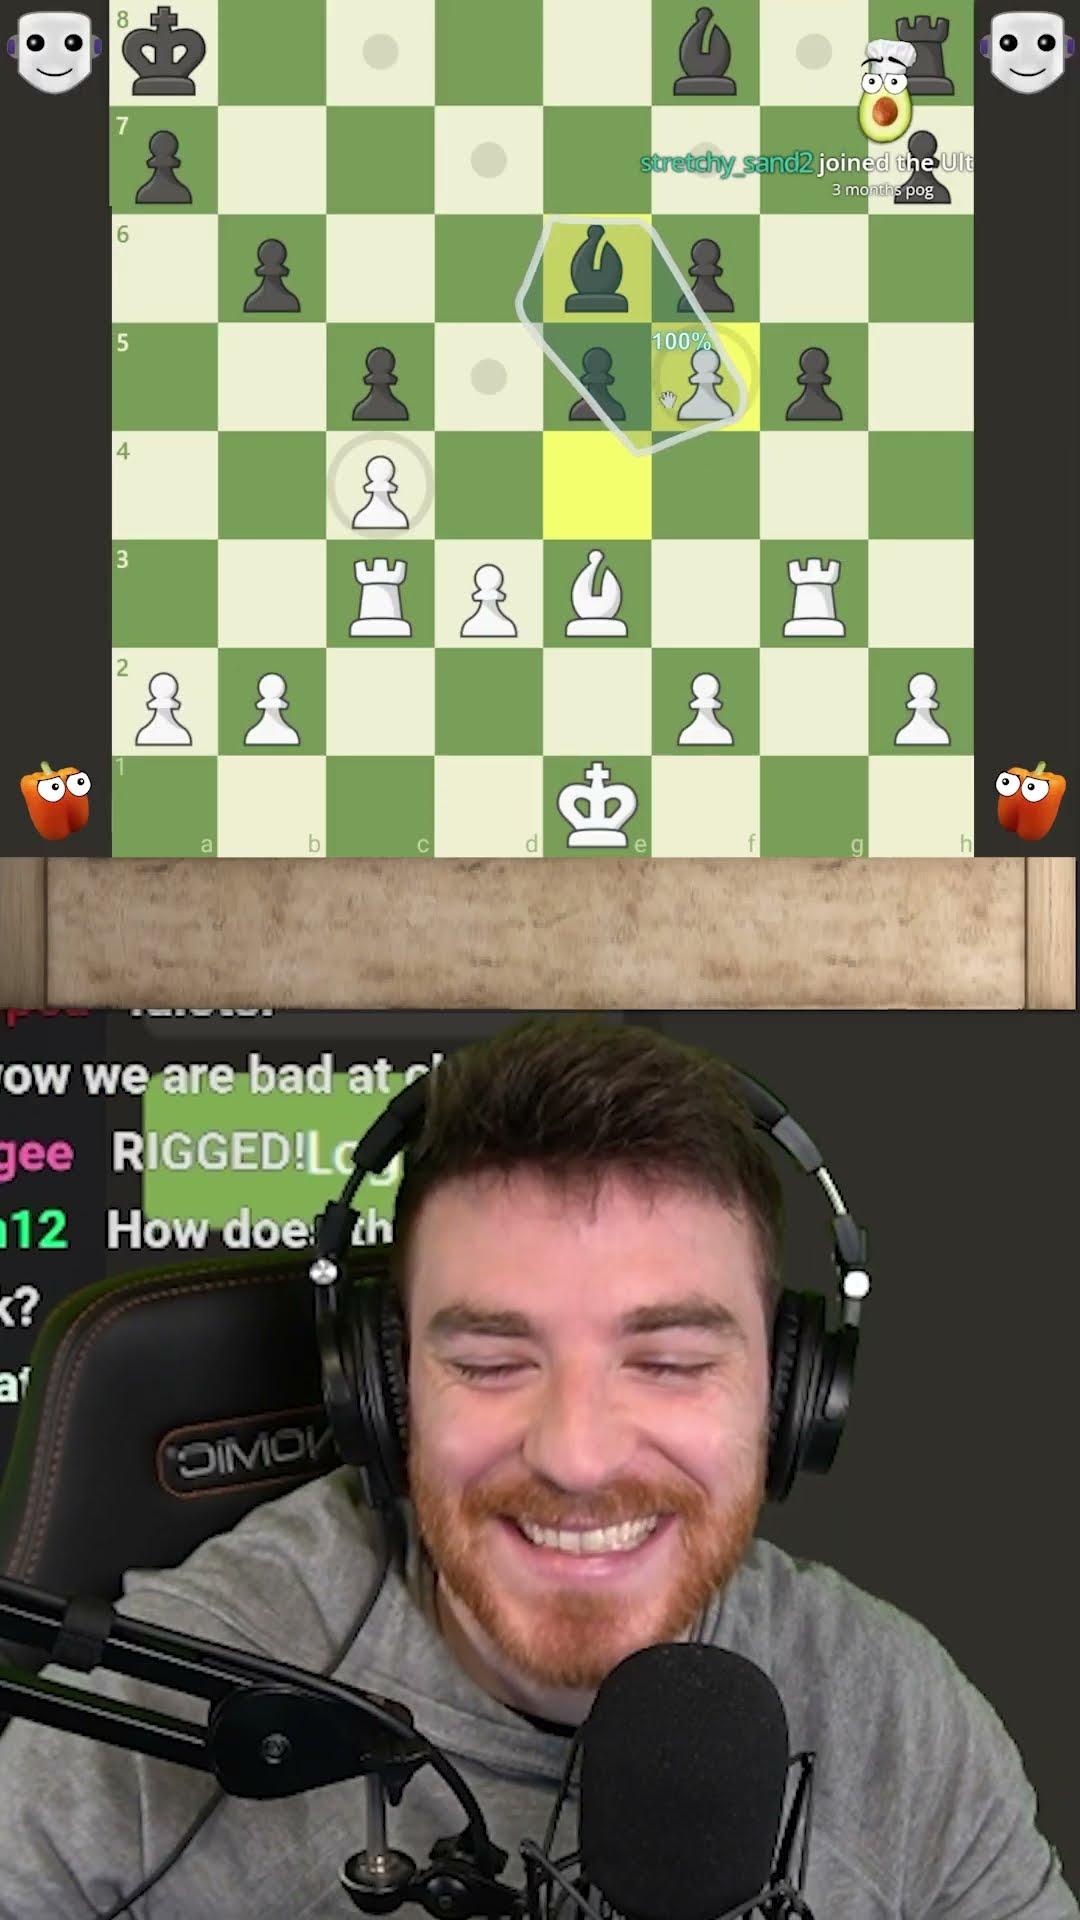 Twitch Chat learns the Queen's Gambit